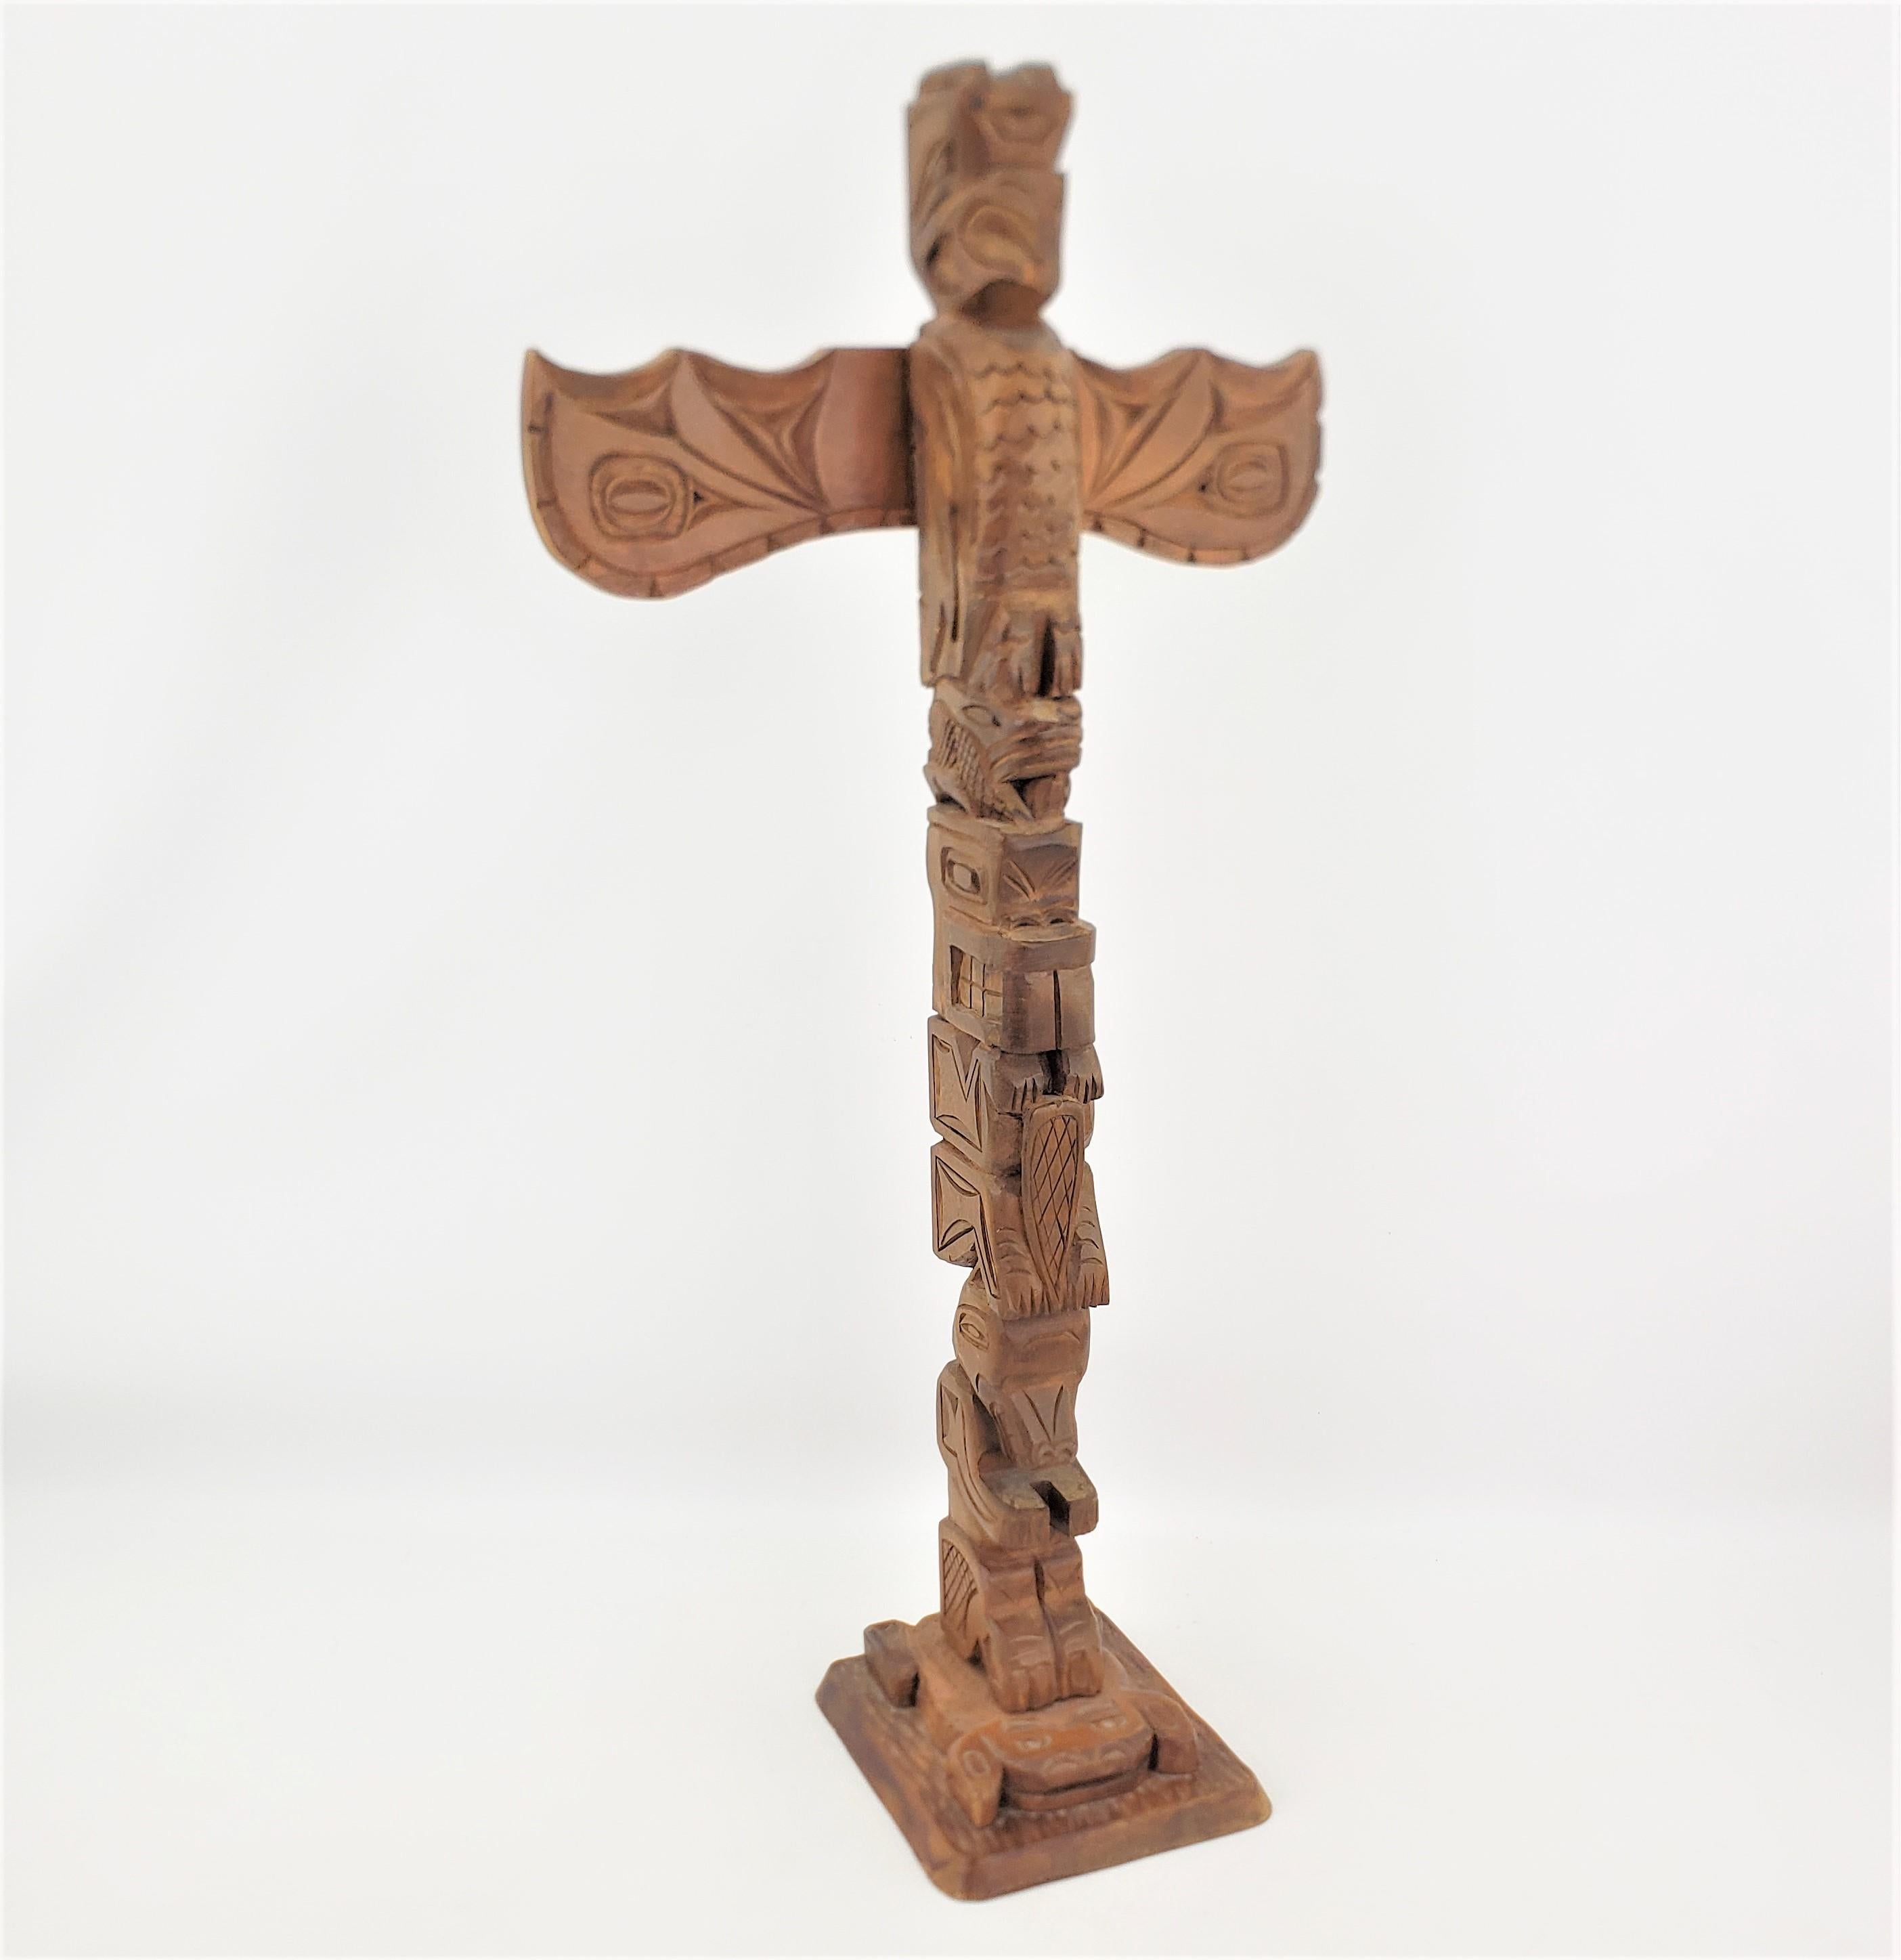 This hand-carved cedar totem is signed by an unknown artist and presumed to have originated from Canada and dating to approximately 1960 and done in the West Coast Indigenous Haida style. The totem is done in solid cedar and depicts several stylized